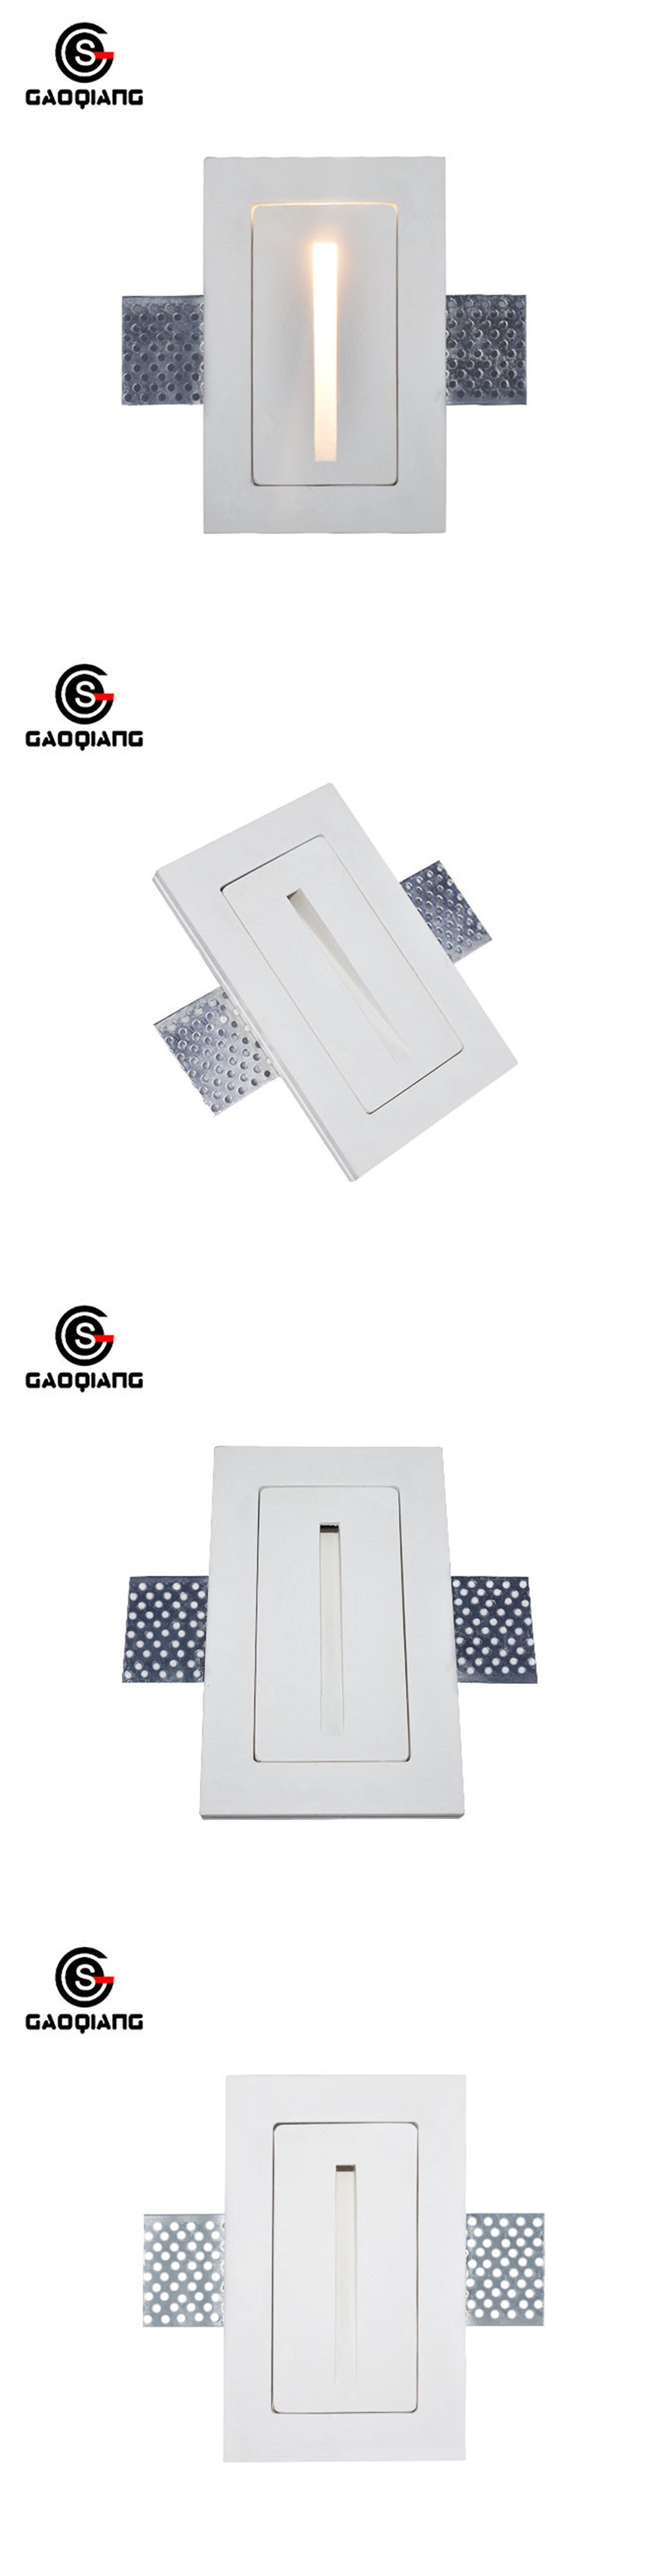 up and Down Wall Light LED Gesso Gypsum Rectangular Recessed Lights Ce RoHS Approved Gqd8007A